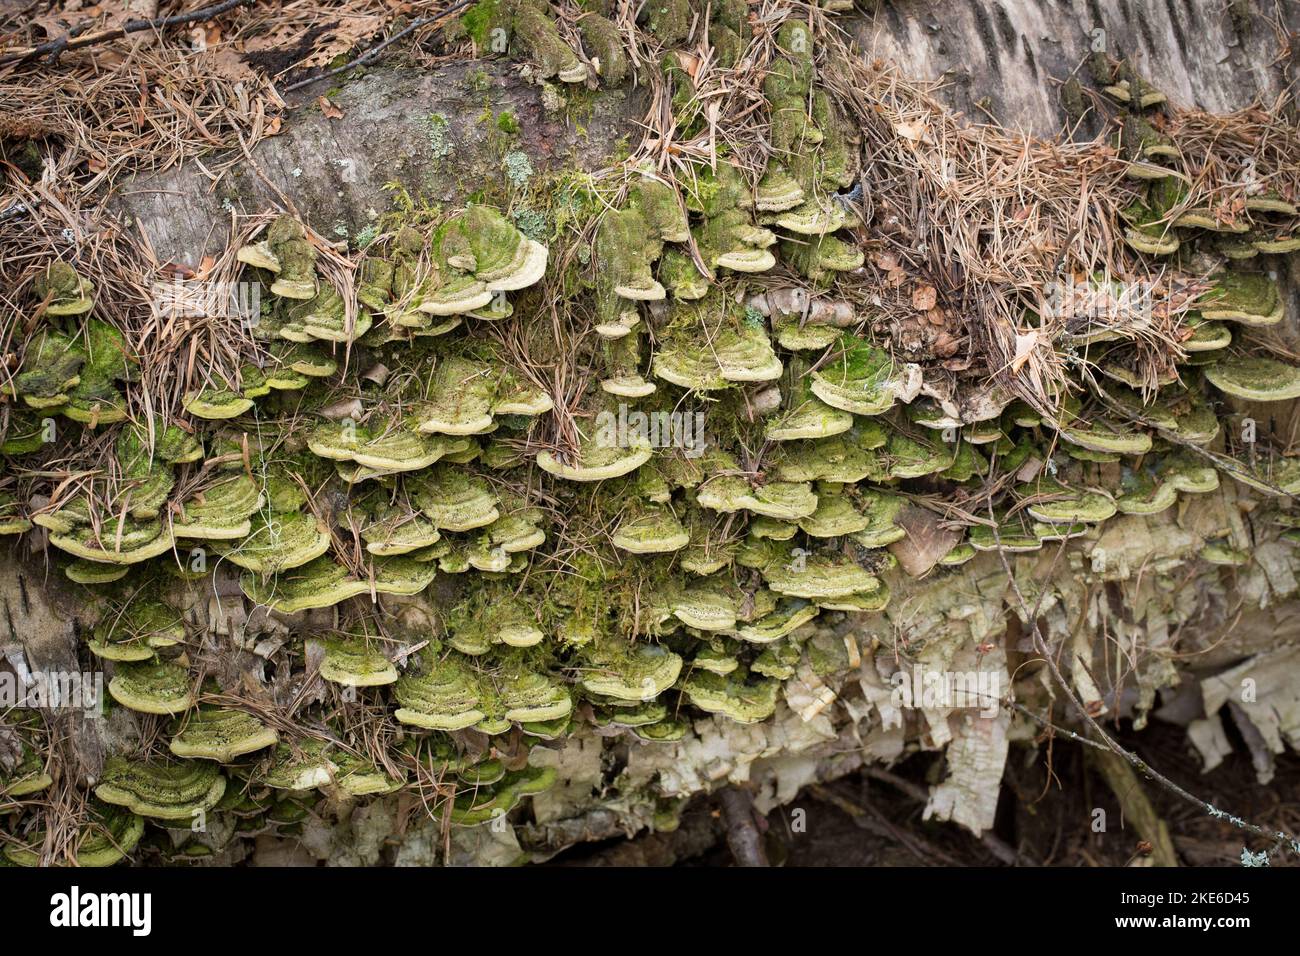 Mossy Maze Polypore mushrooms, Cerrena unicolor, found growing on the trunk of a dead paper birch tree, in Troy, Montana  Synonyms of C. unicolor incl Stock Photo